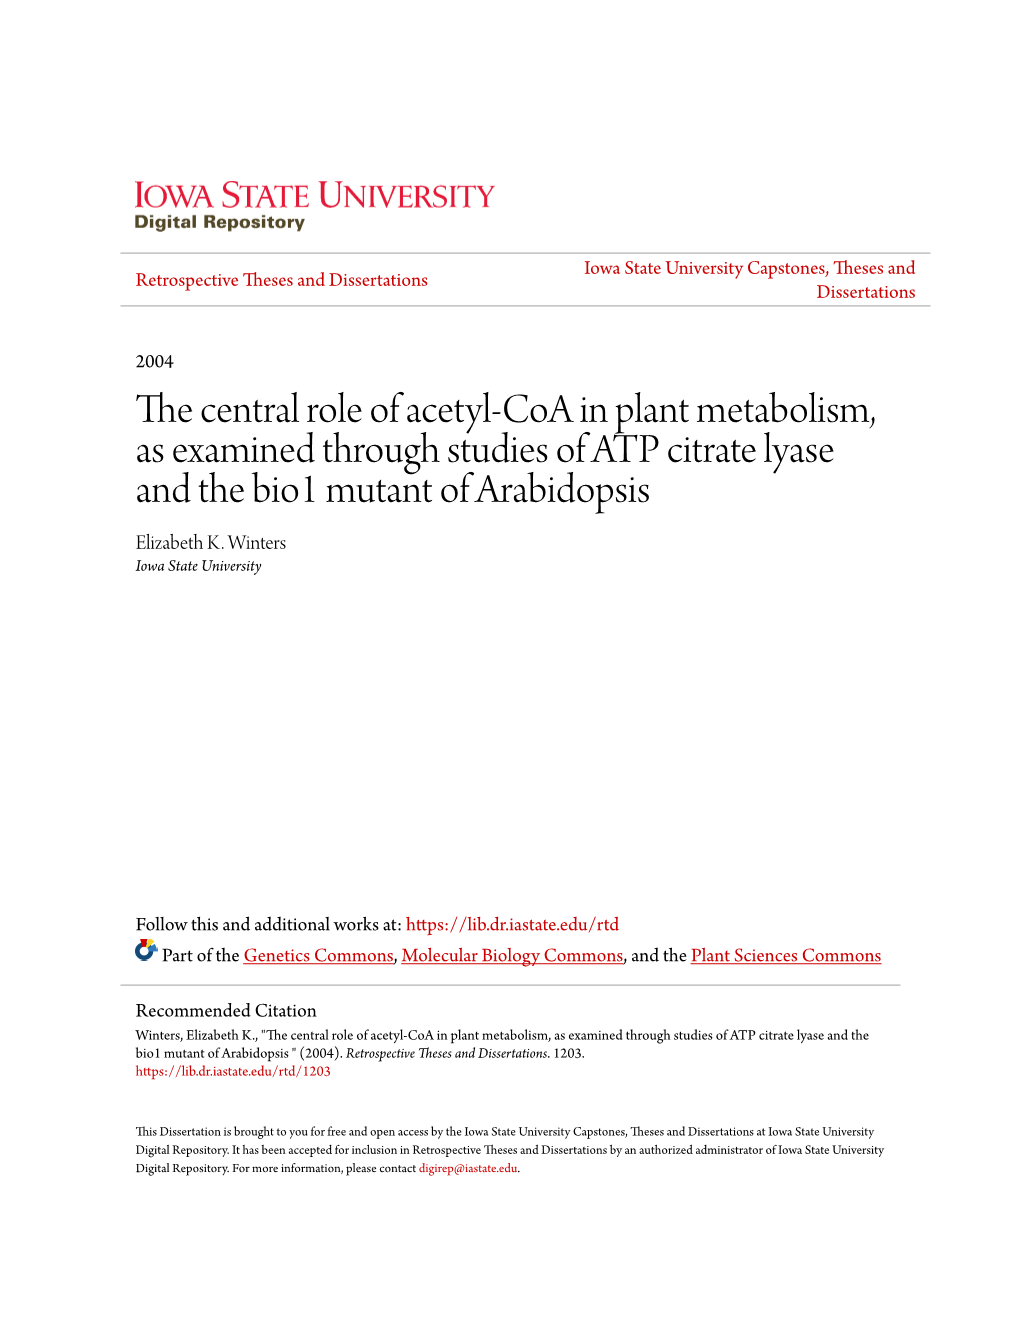 The Central Role of Acetyl-Coa in Plant Metabolism, As Examined Through Studies of ATP Citrate Lyase and the Bio1 Mutant of Arabidopsis Elizabeth K